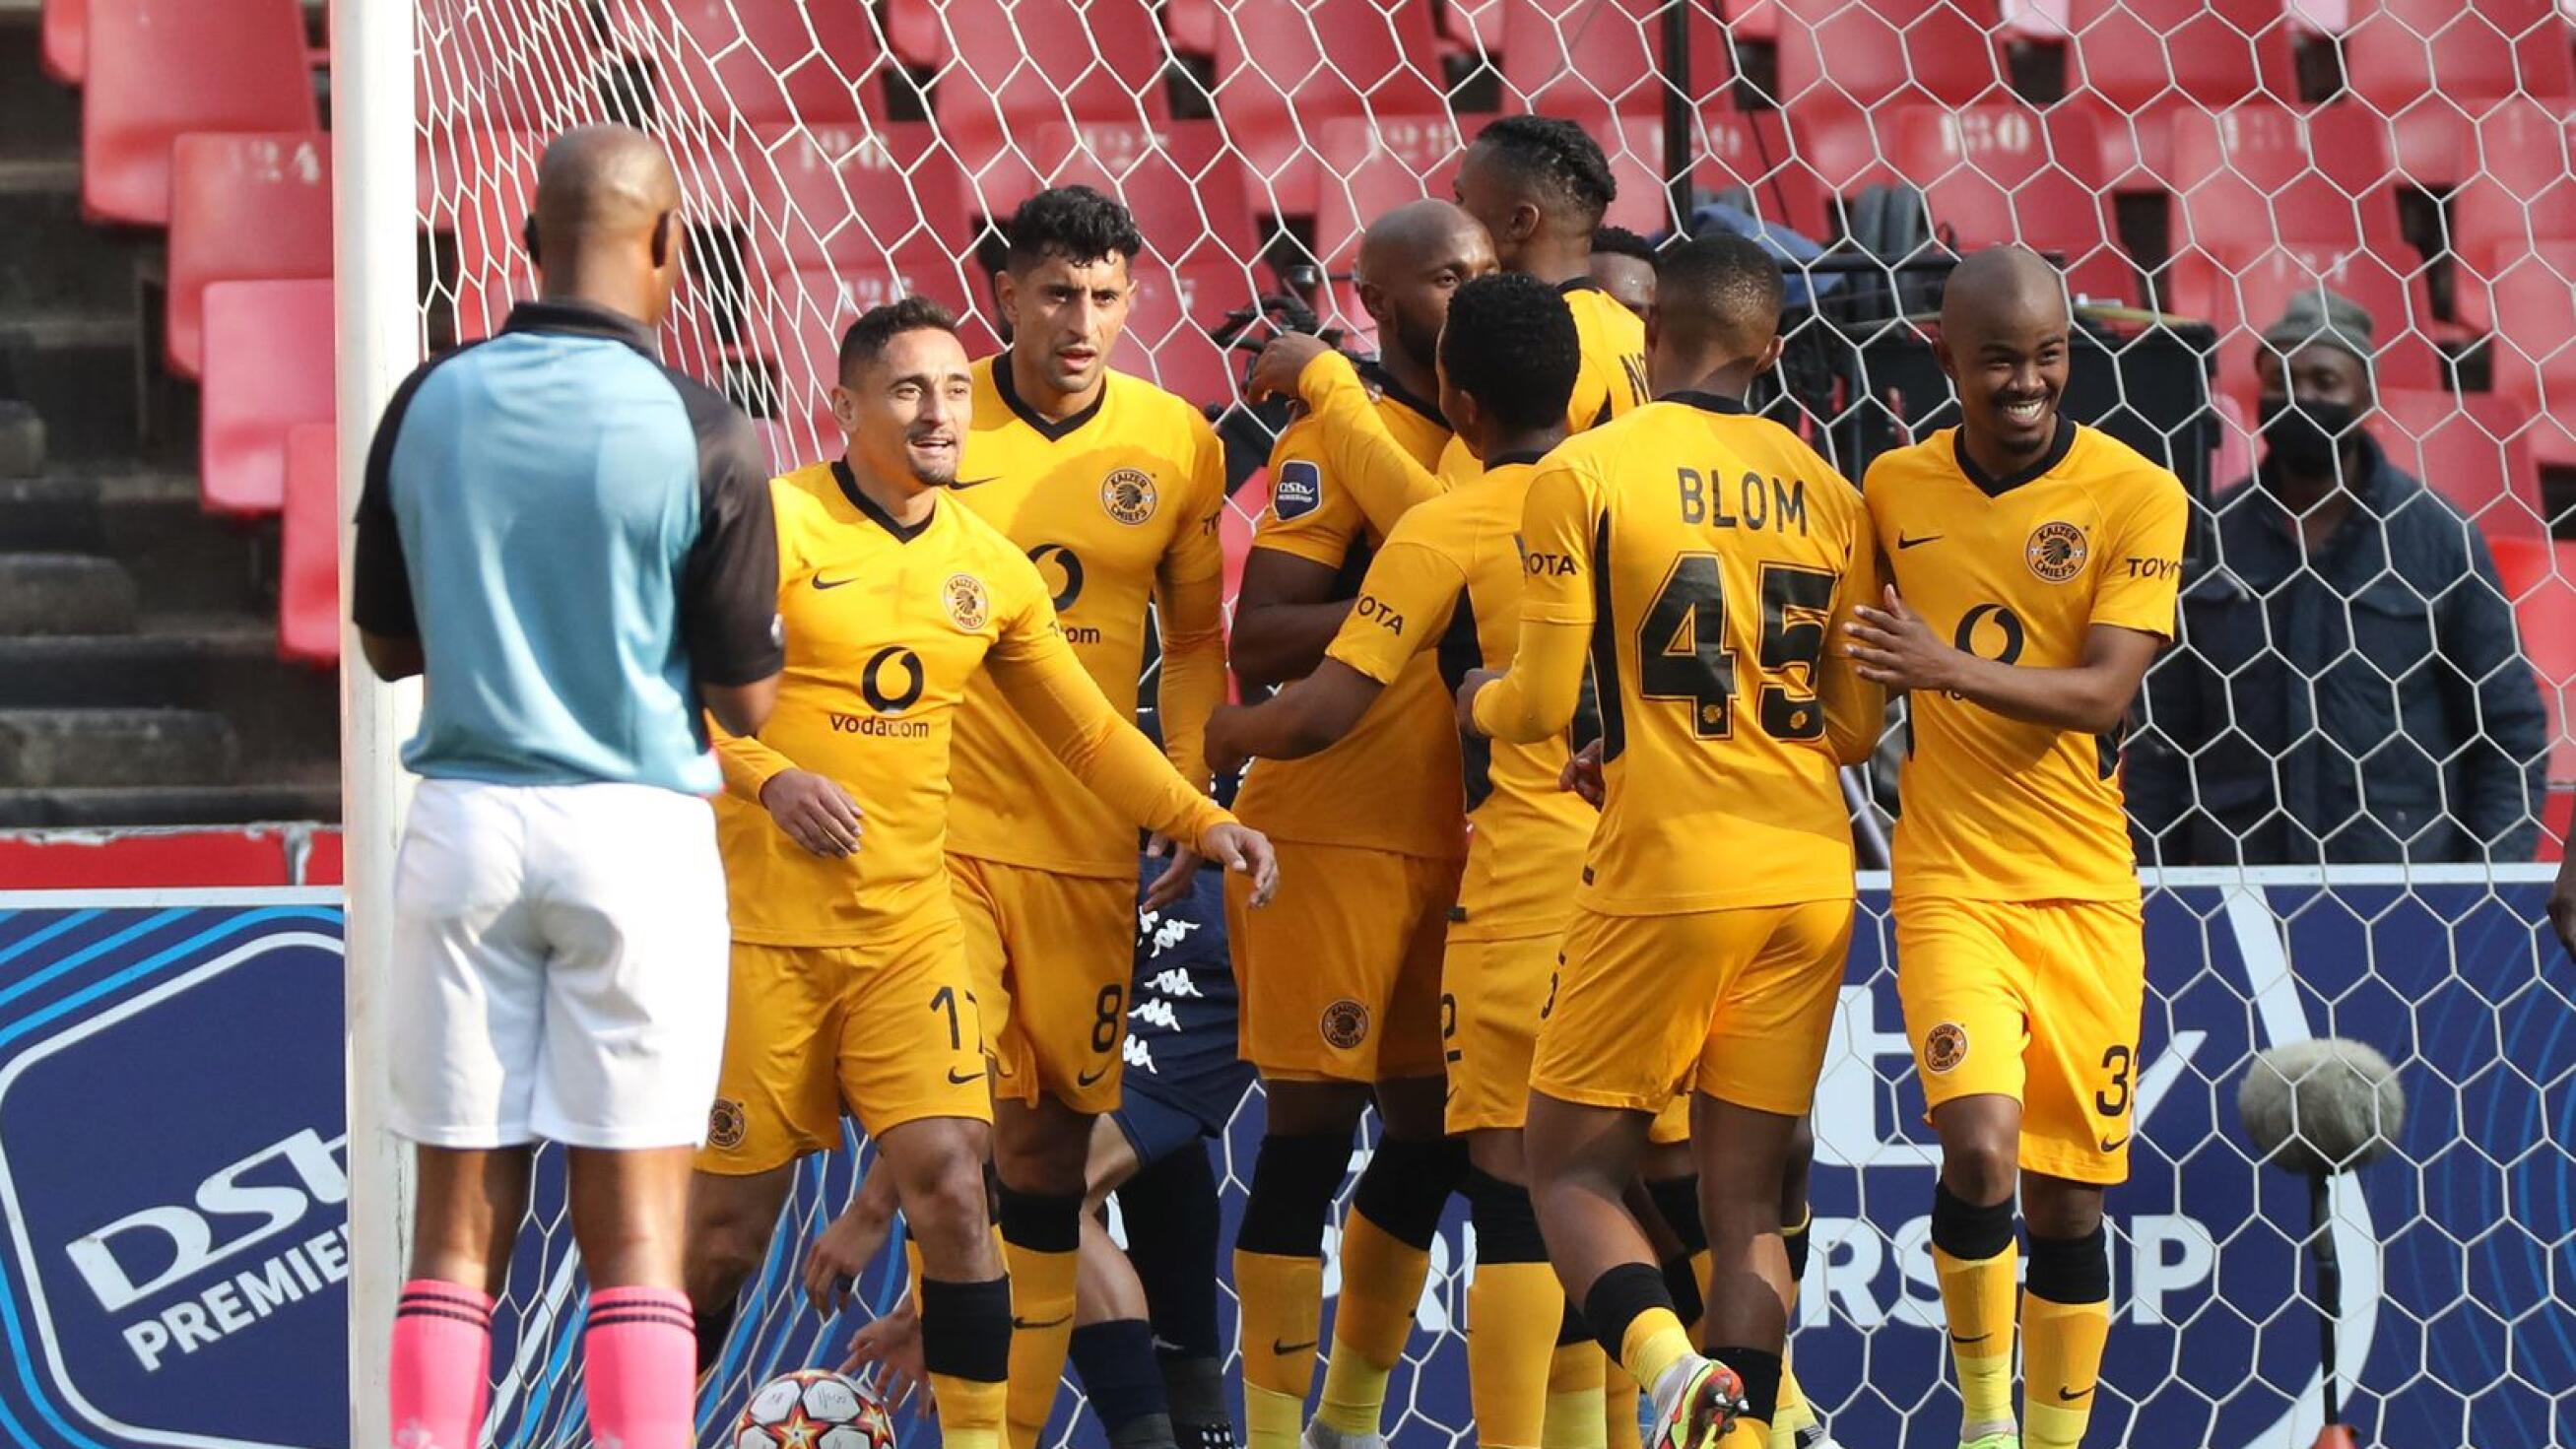 Kaizer Chiefs’ Ramahlwe Mphahlele celebrates with team-mates after scoring the only goal of the game during their DStv Premiership clash against Sekhukhune United at Ellis Park in Johannesburg on Saturday